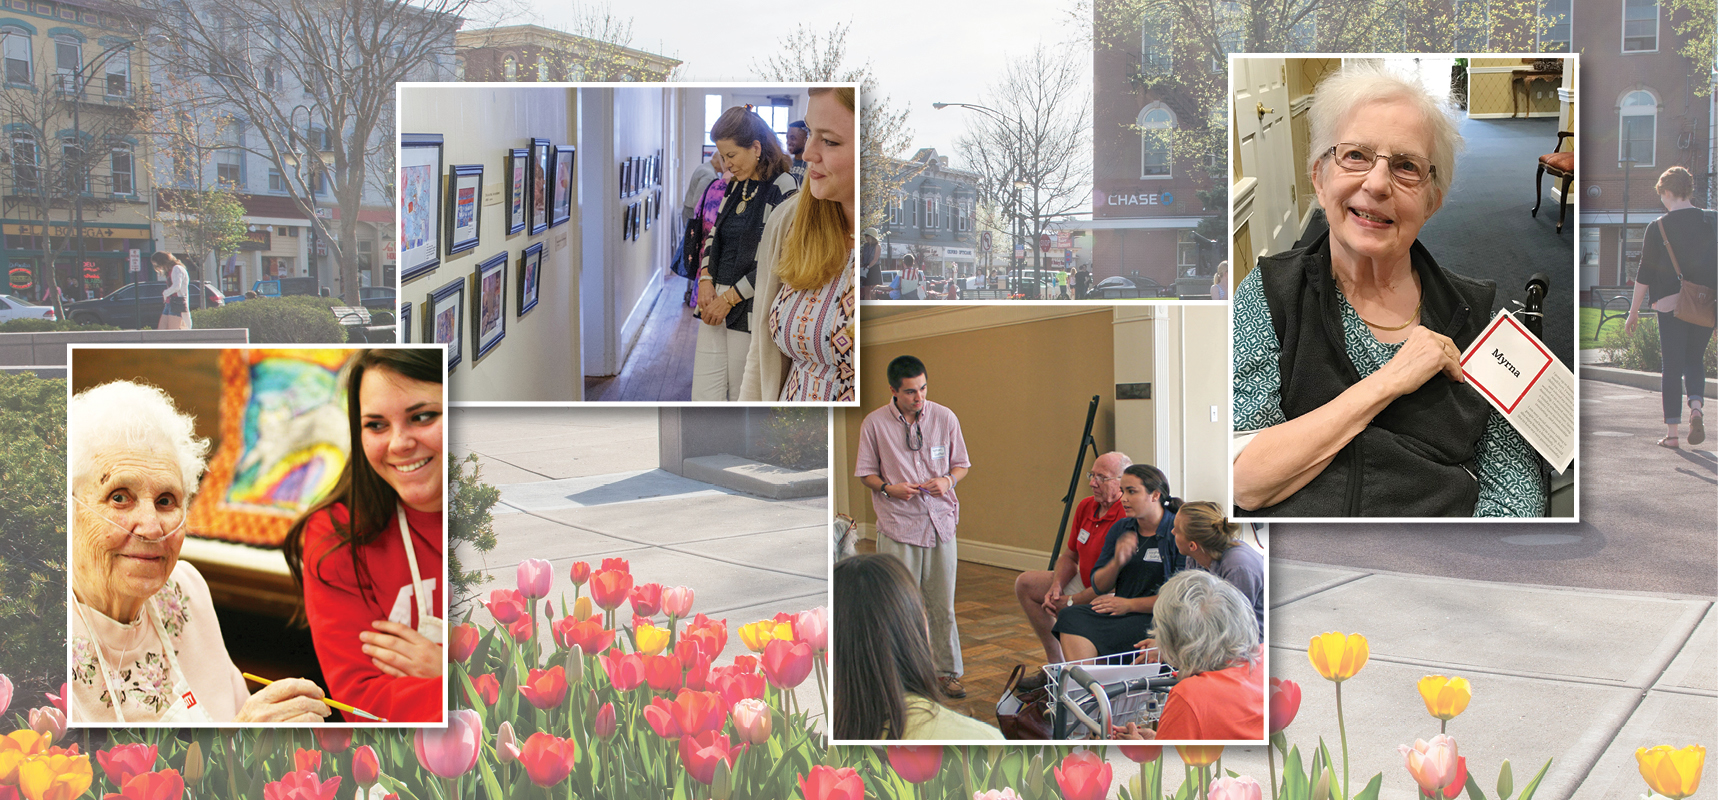 Images of the Oxford community. uptown oxford, a Miami student and an OMA artist, students giving a community presentation, families looking at a gallery at an OMA art show, and a nursing home resident showing off her PAL card